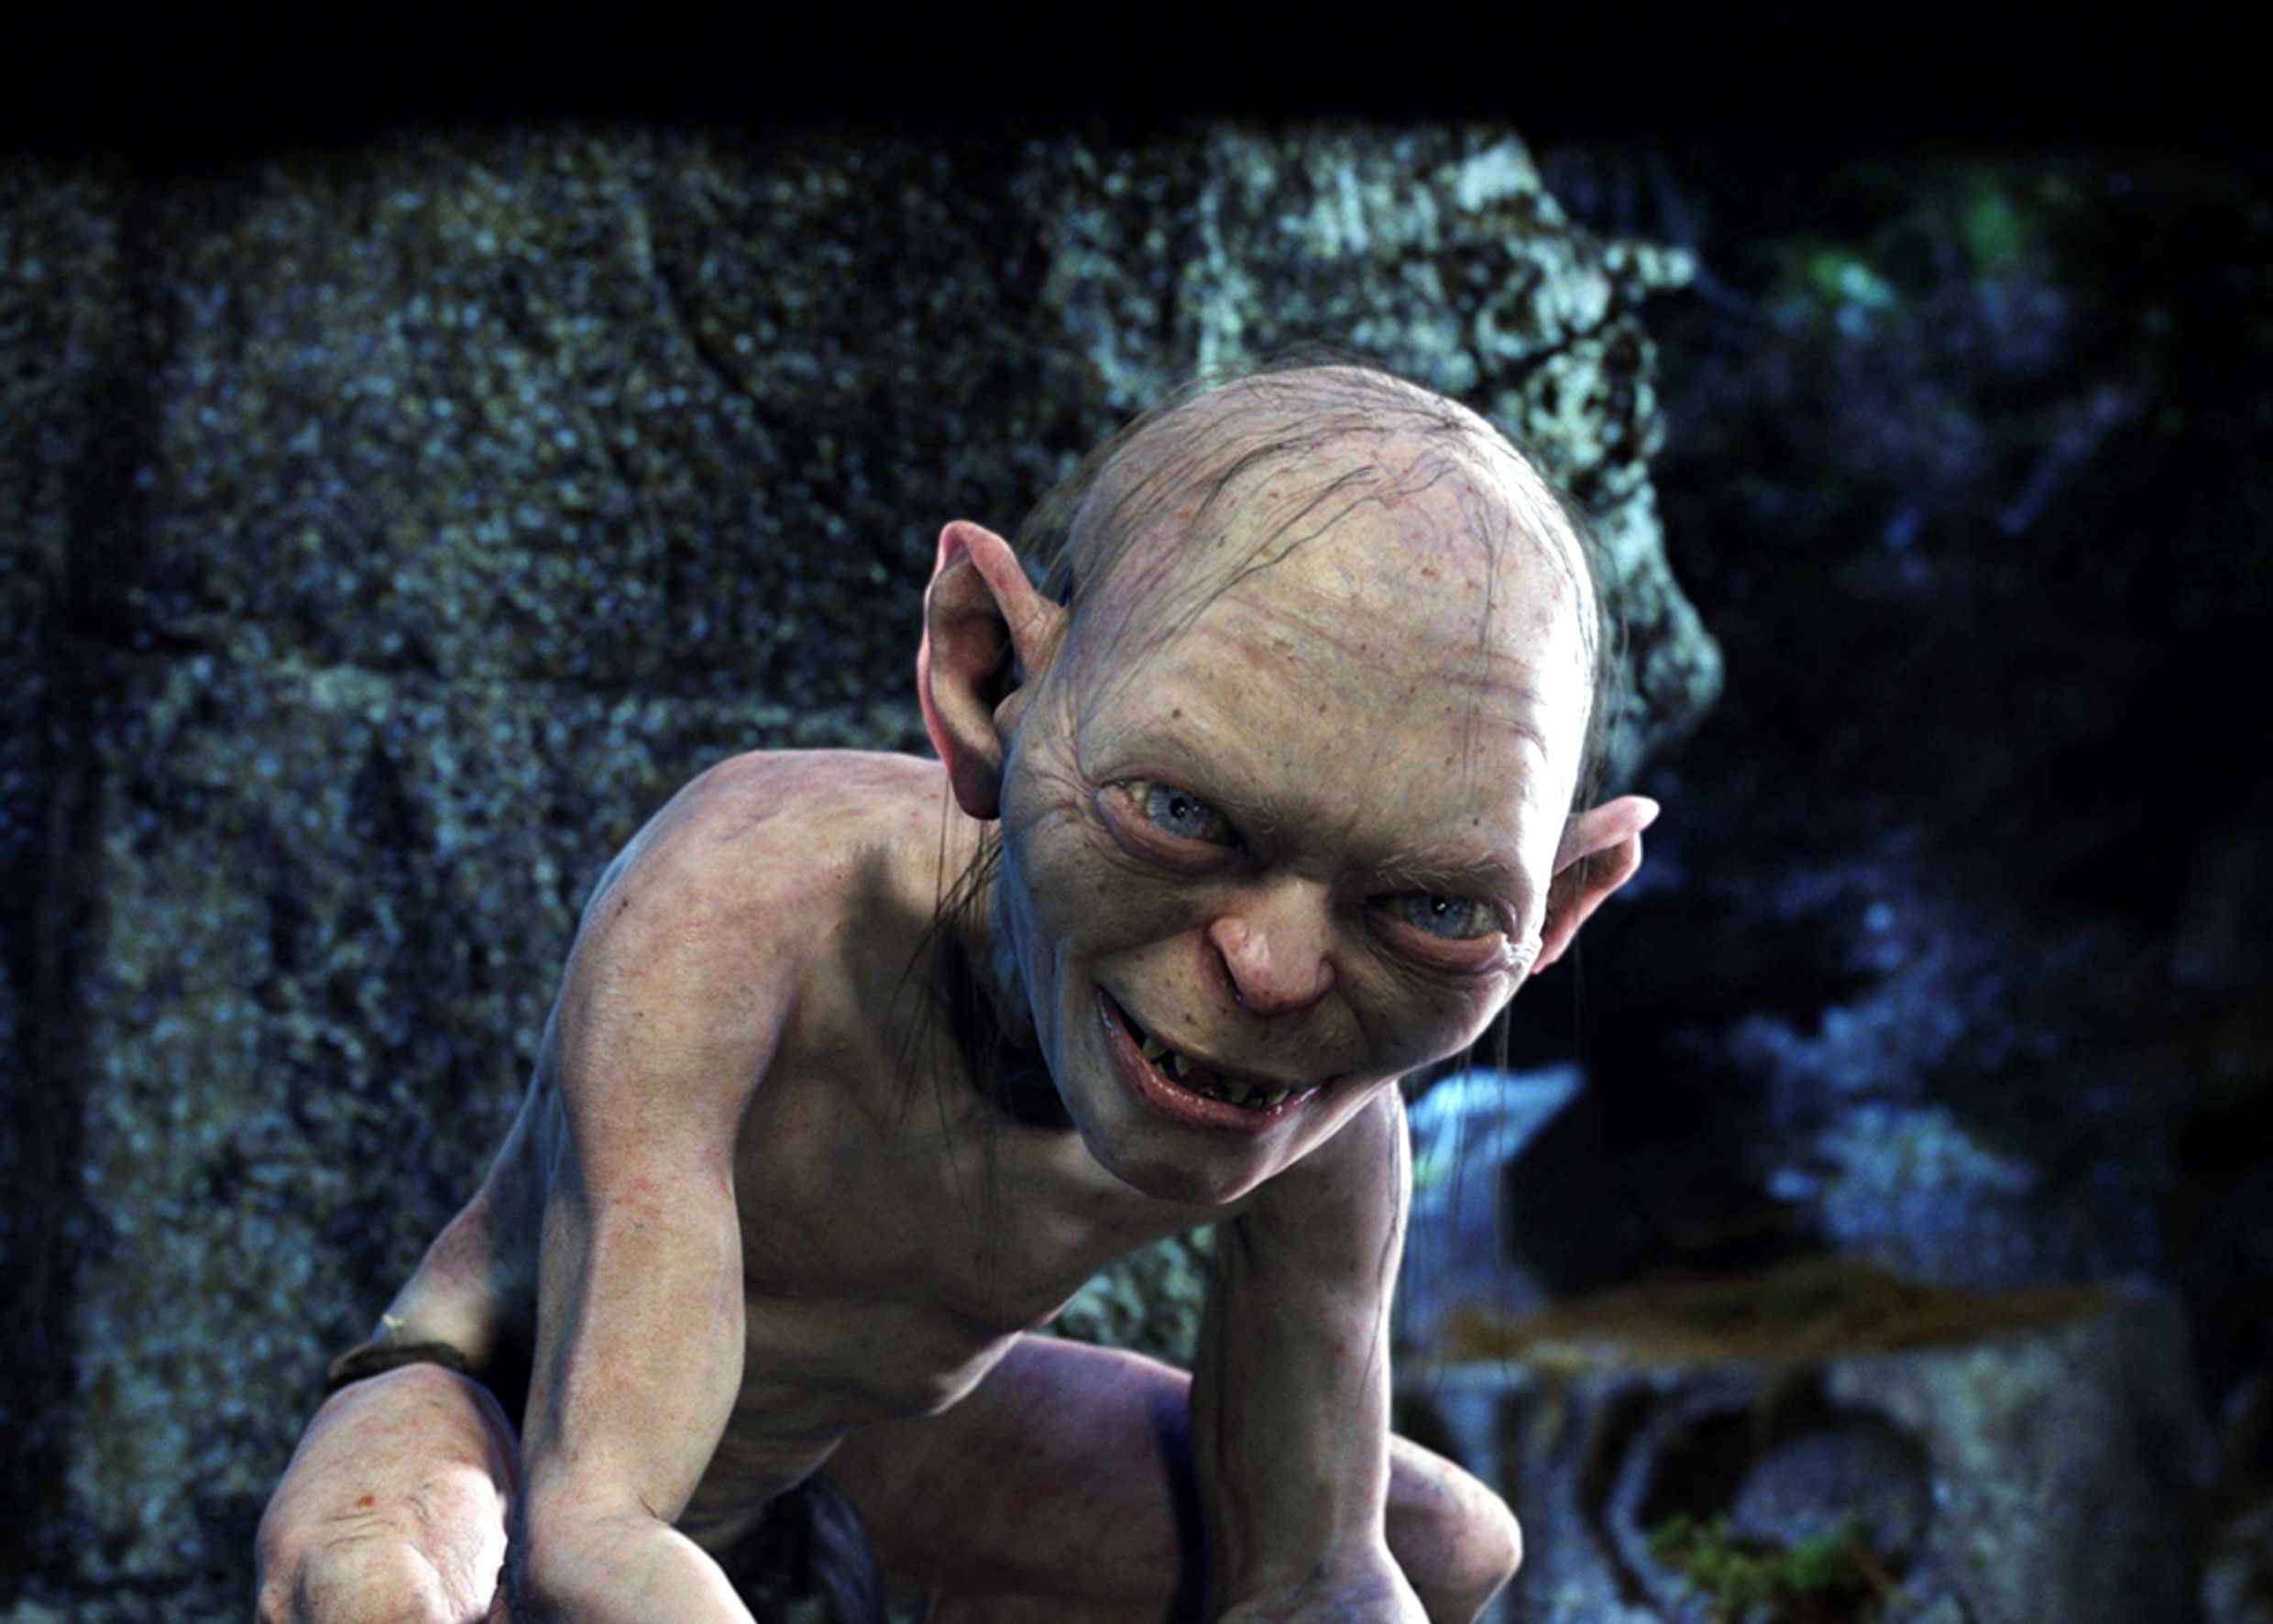 The Lord of the Rings: Gollum Sounds Like It'll Launch on PS5